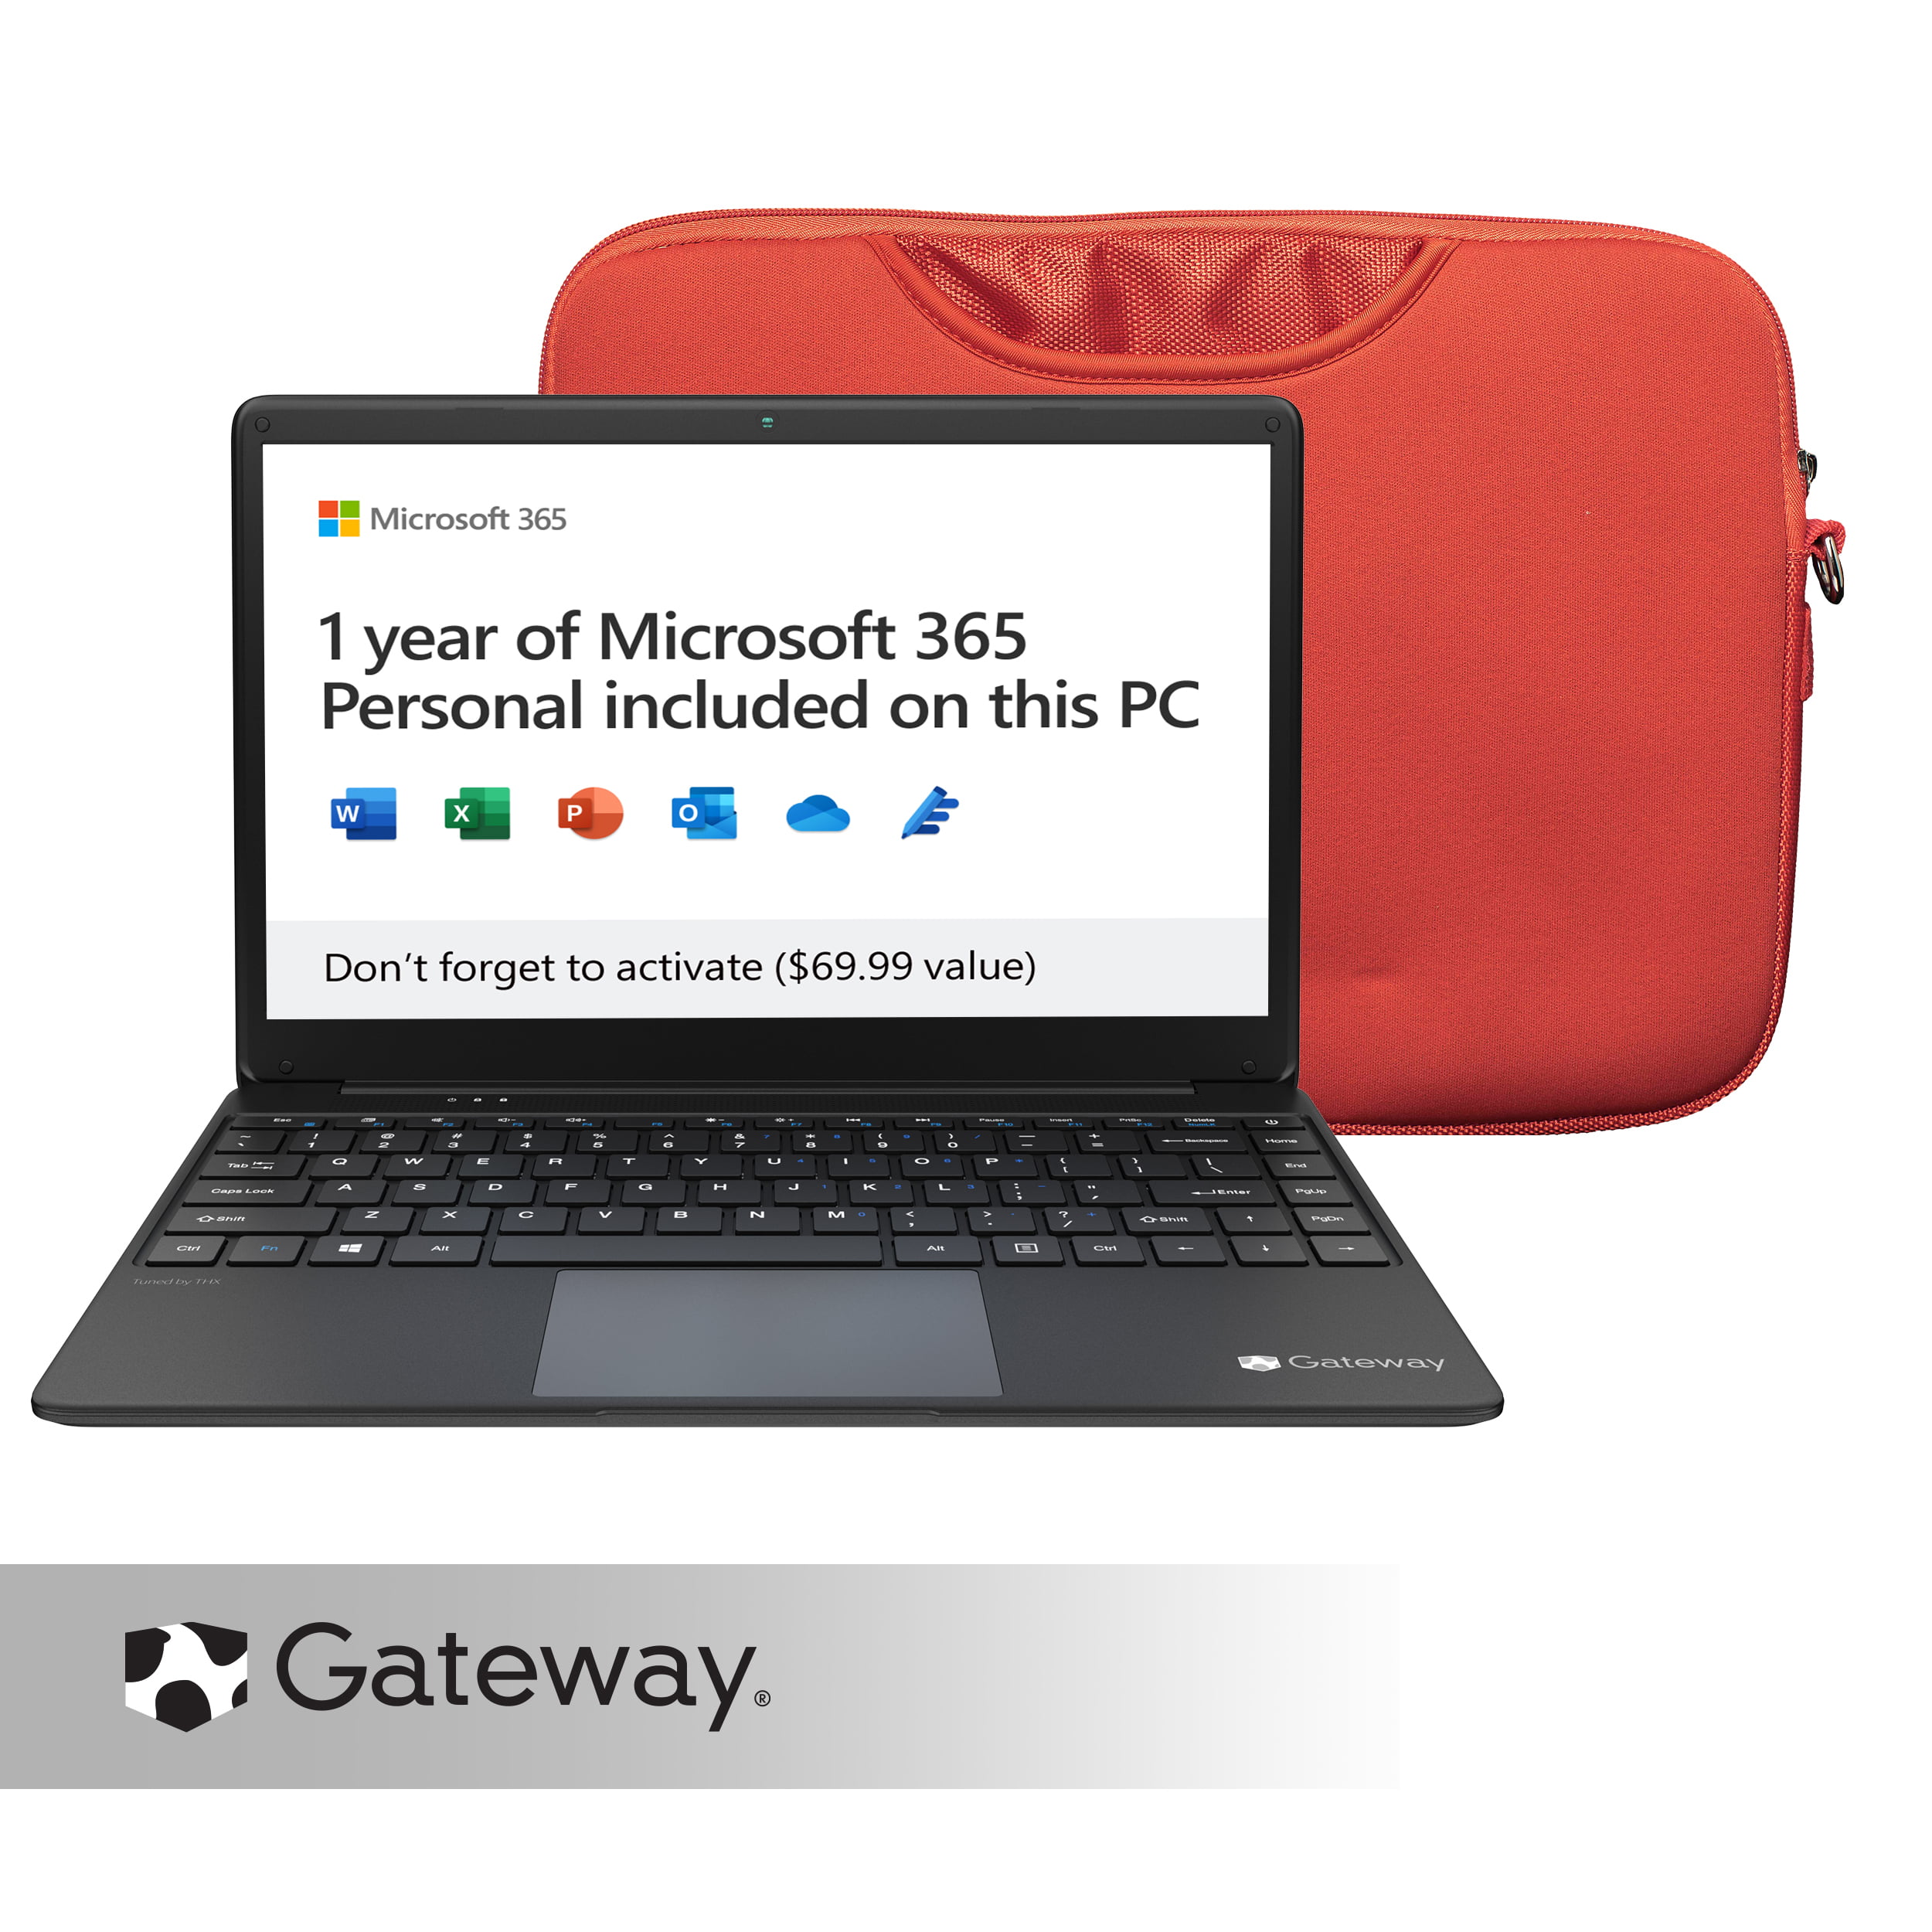 Gateway 14.1" Ultra Slim Notebook, FHD, Intel N4020, 4GB/64GB, THX Audio, 1MP Webcam, Windows 10 S, Micro 365 Personal 1-Year Included, Carrying Case Included,$127 Free Shi $129